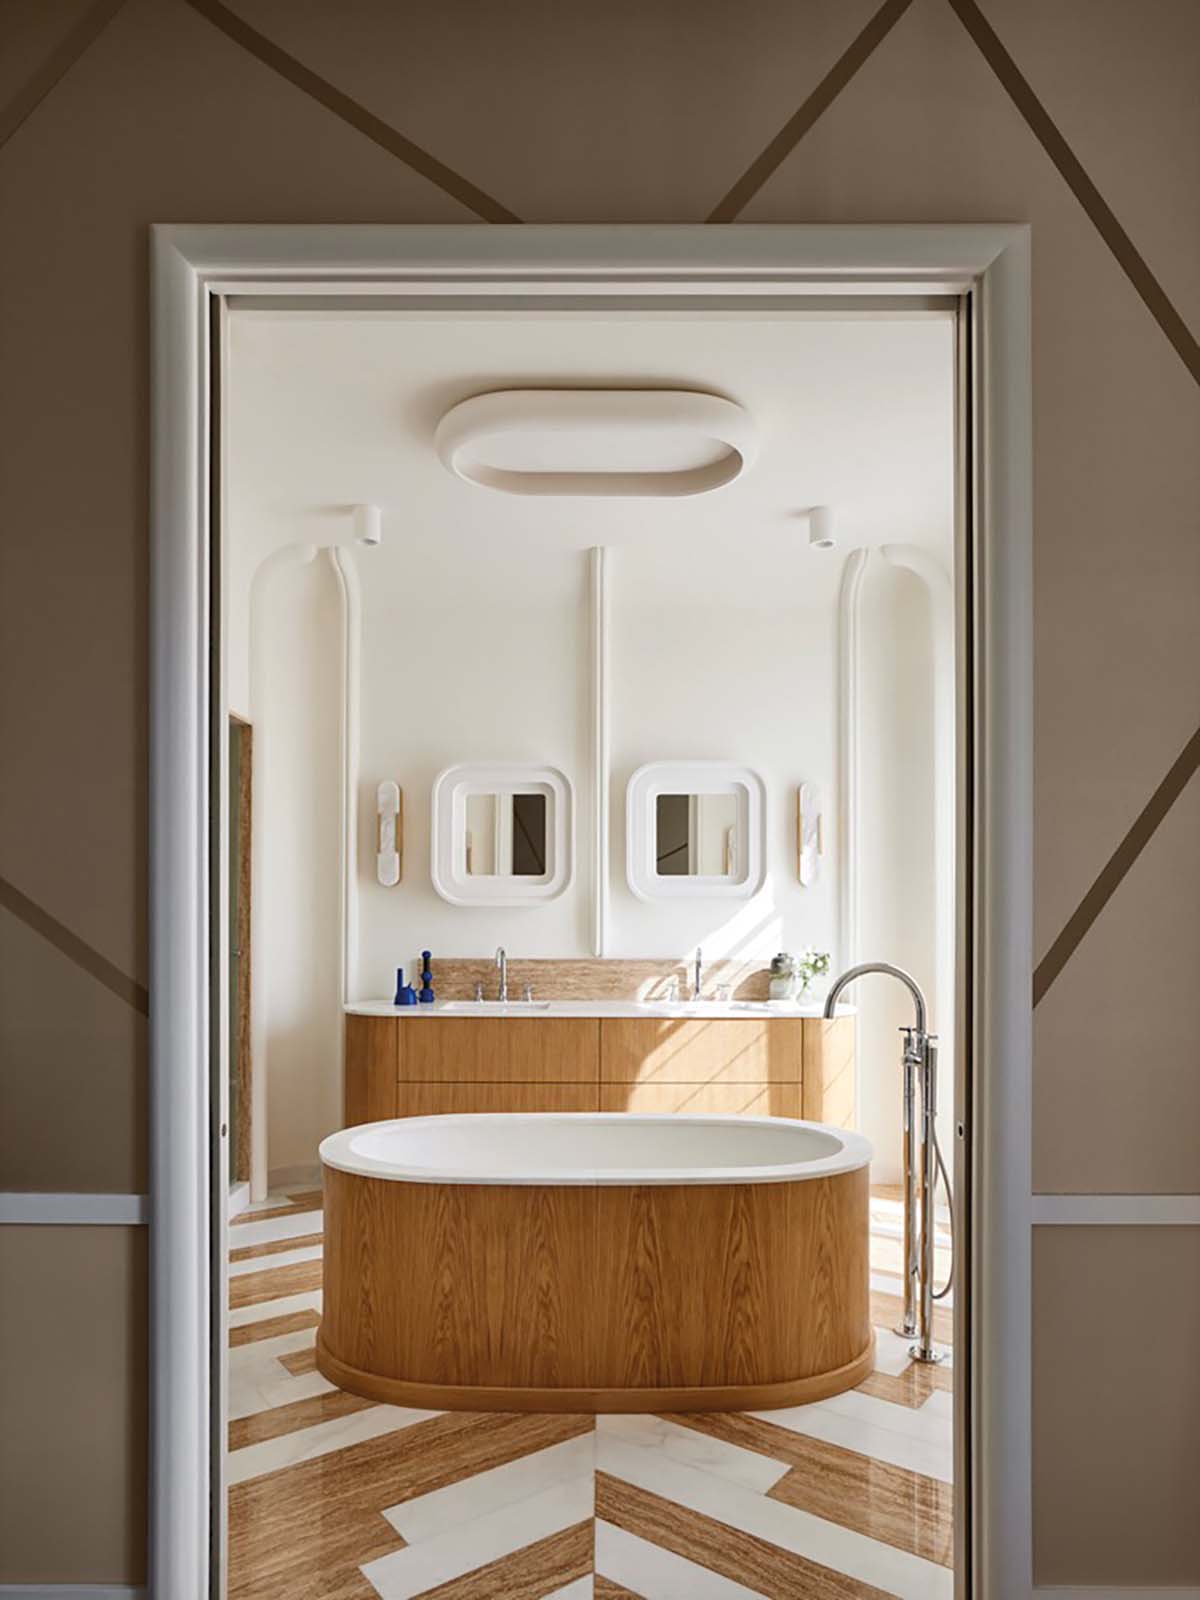 A bathroom in Paris, designed by Fabrice Jean featuring oak and plaster accents and a chevron patterned floor made up of travertine and white Macael marble